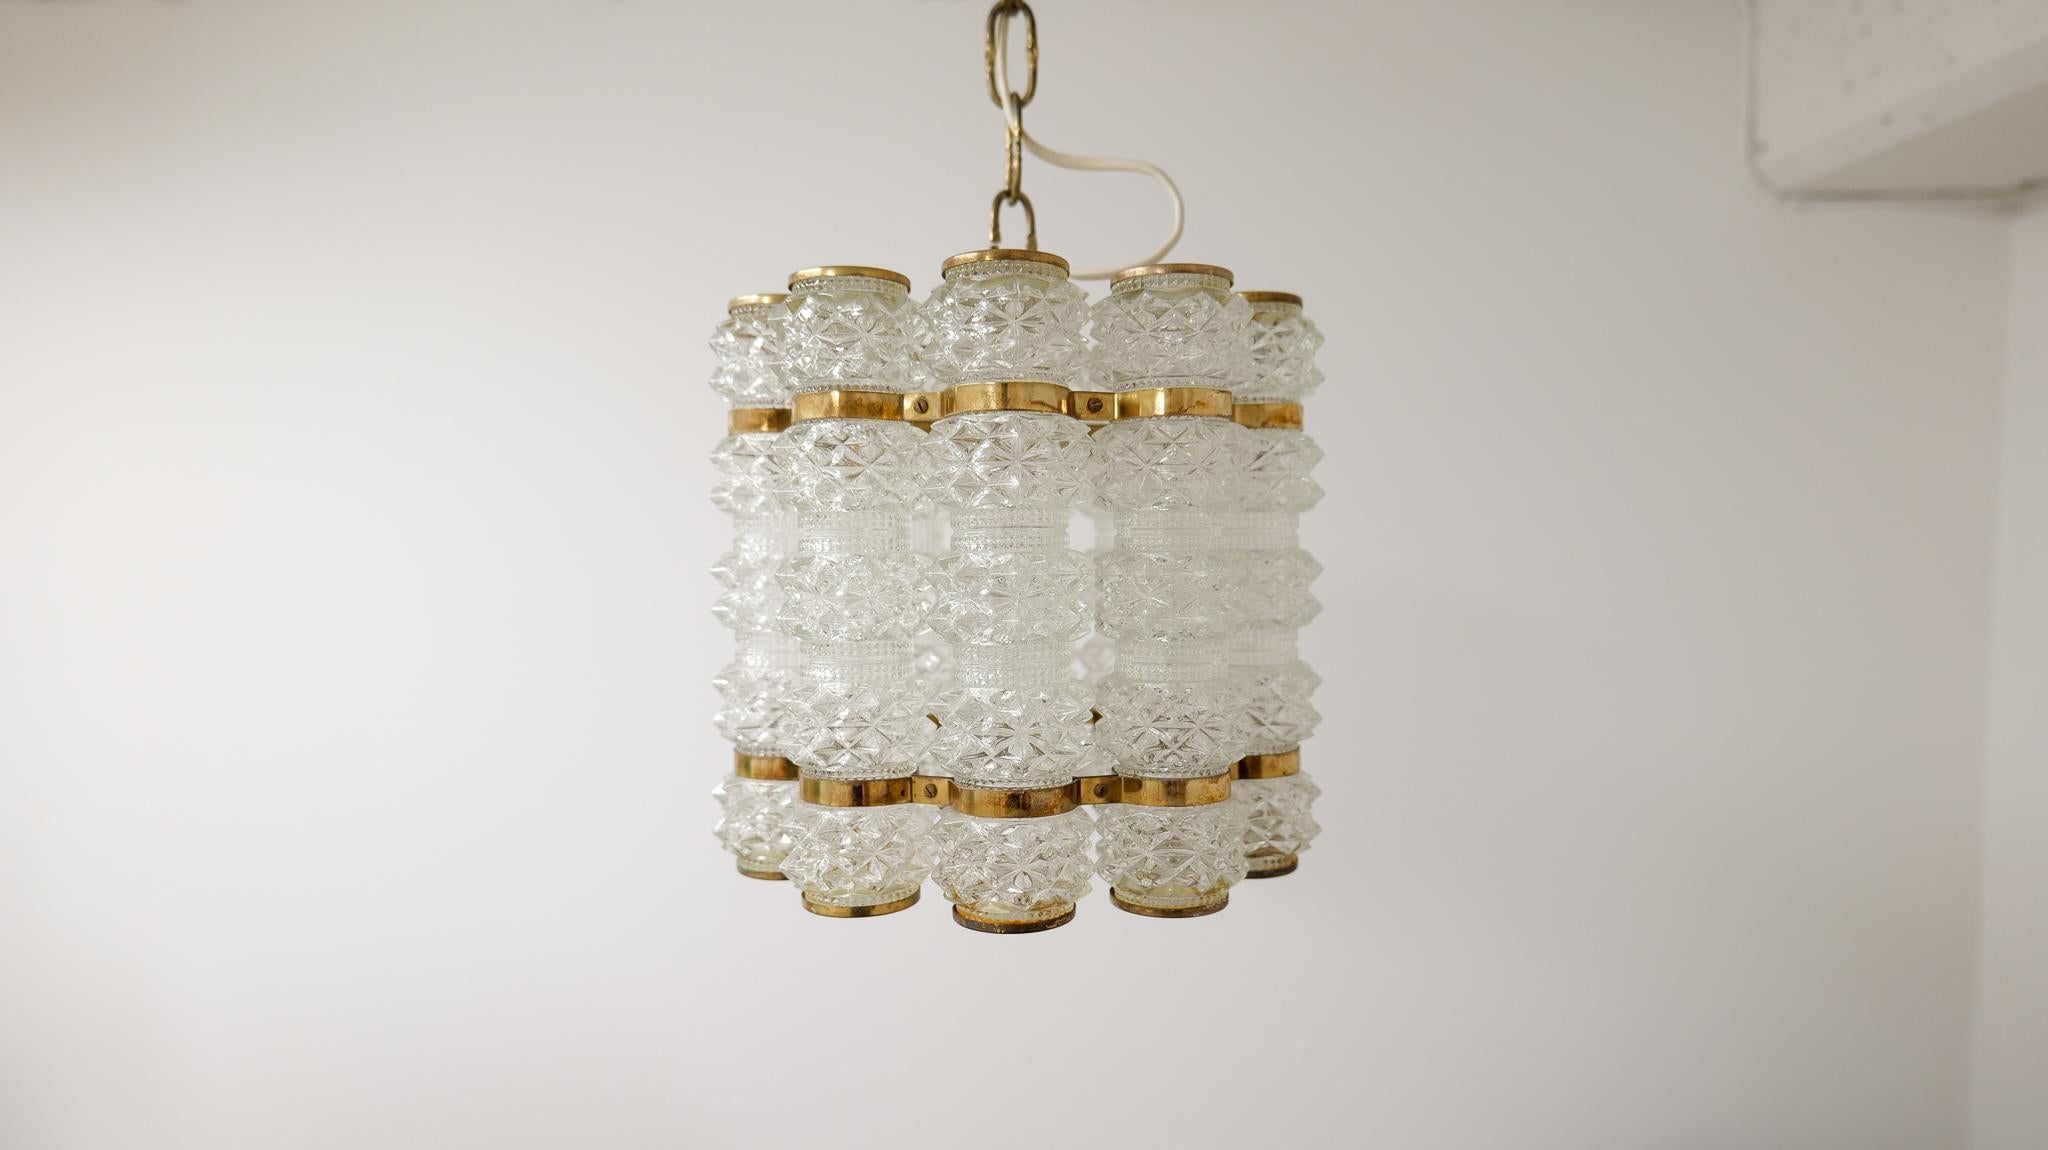 Mid-20th Century Brass and Crystal Cylinder Chandelier by Tyringe for Orrefors, Sweden For Sale